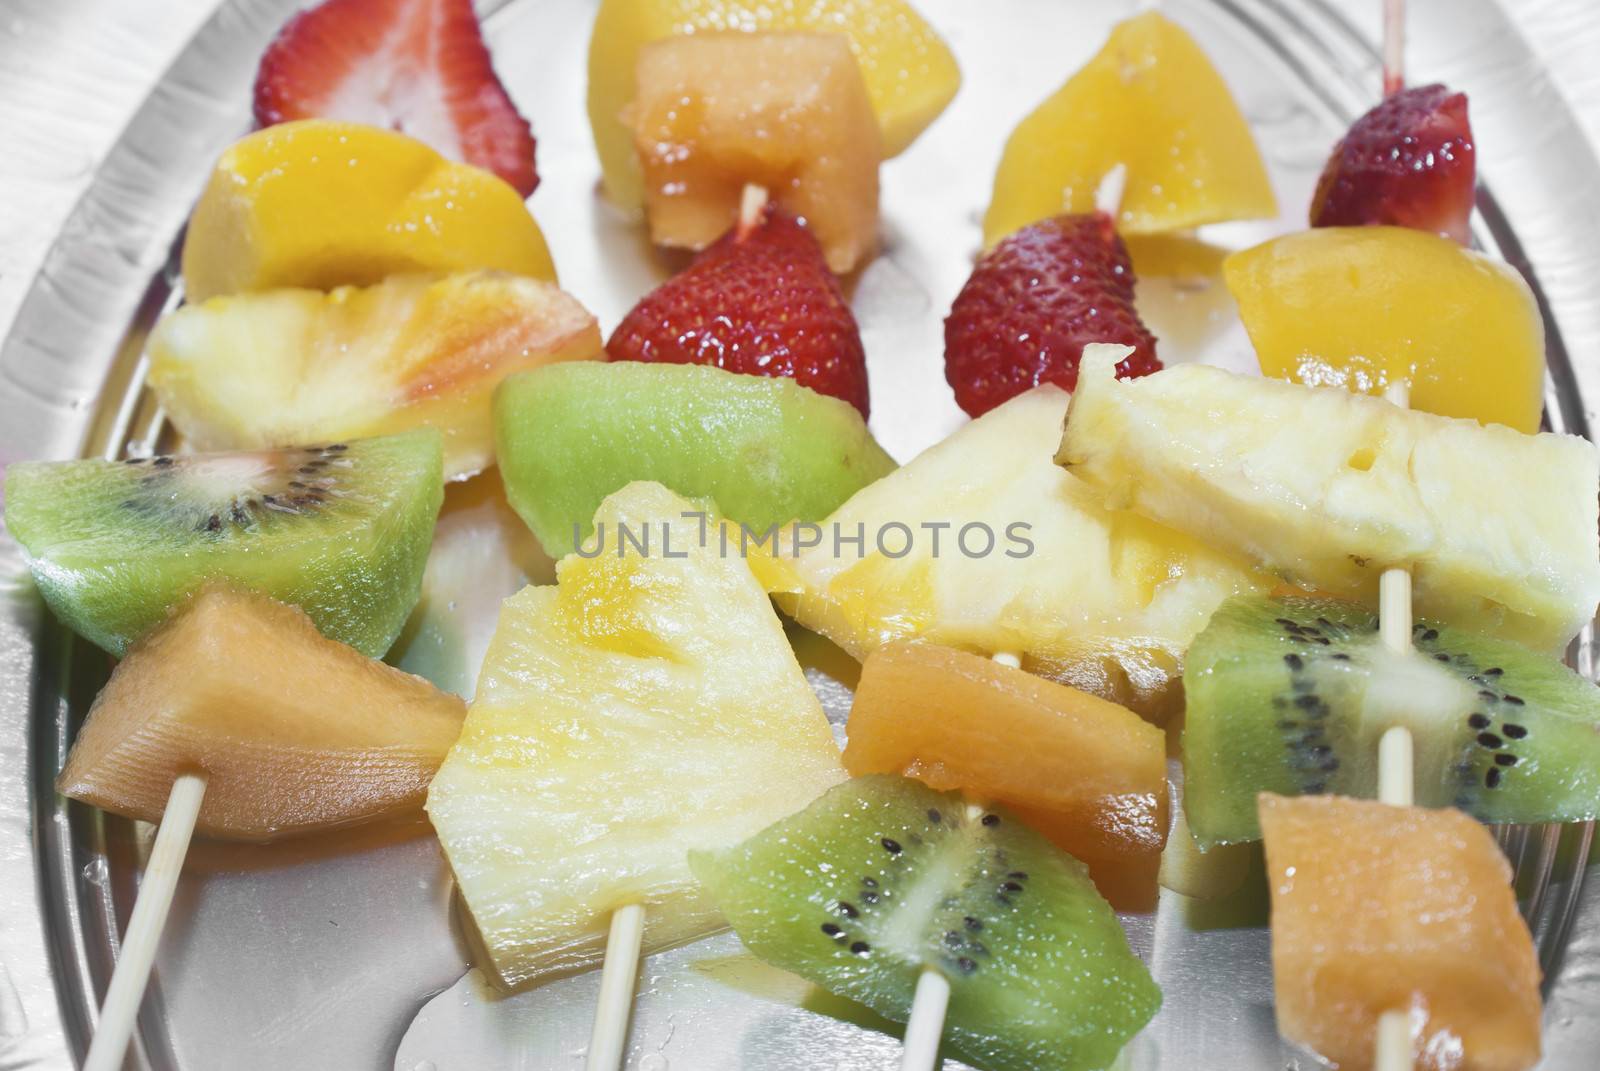 Mixed fruits on skewers close-up